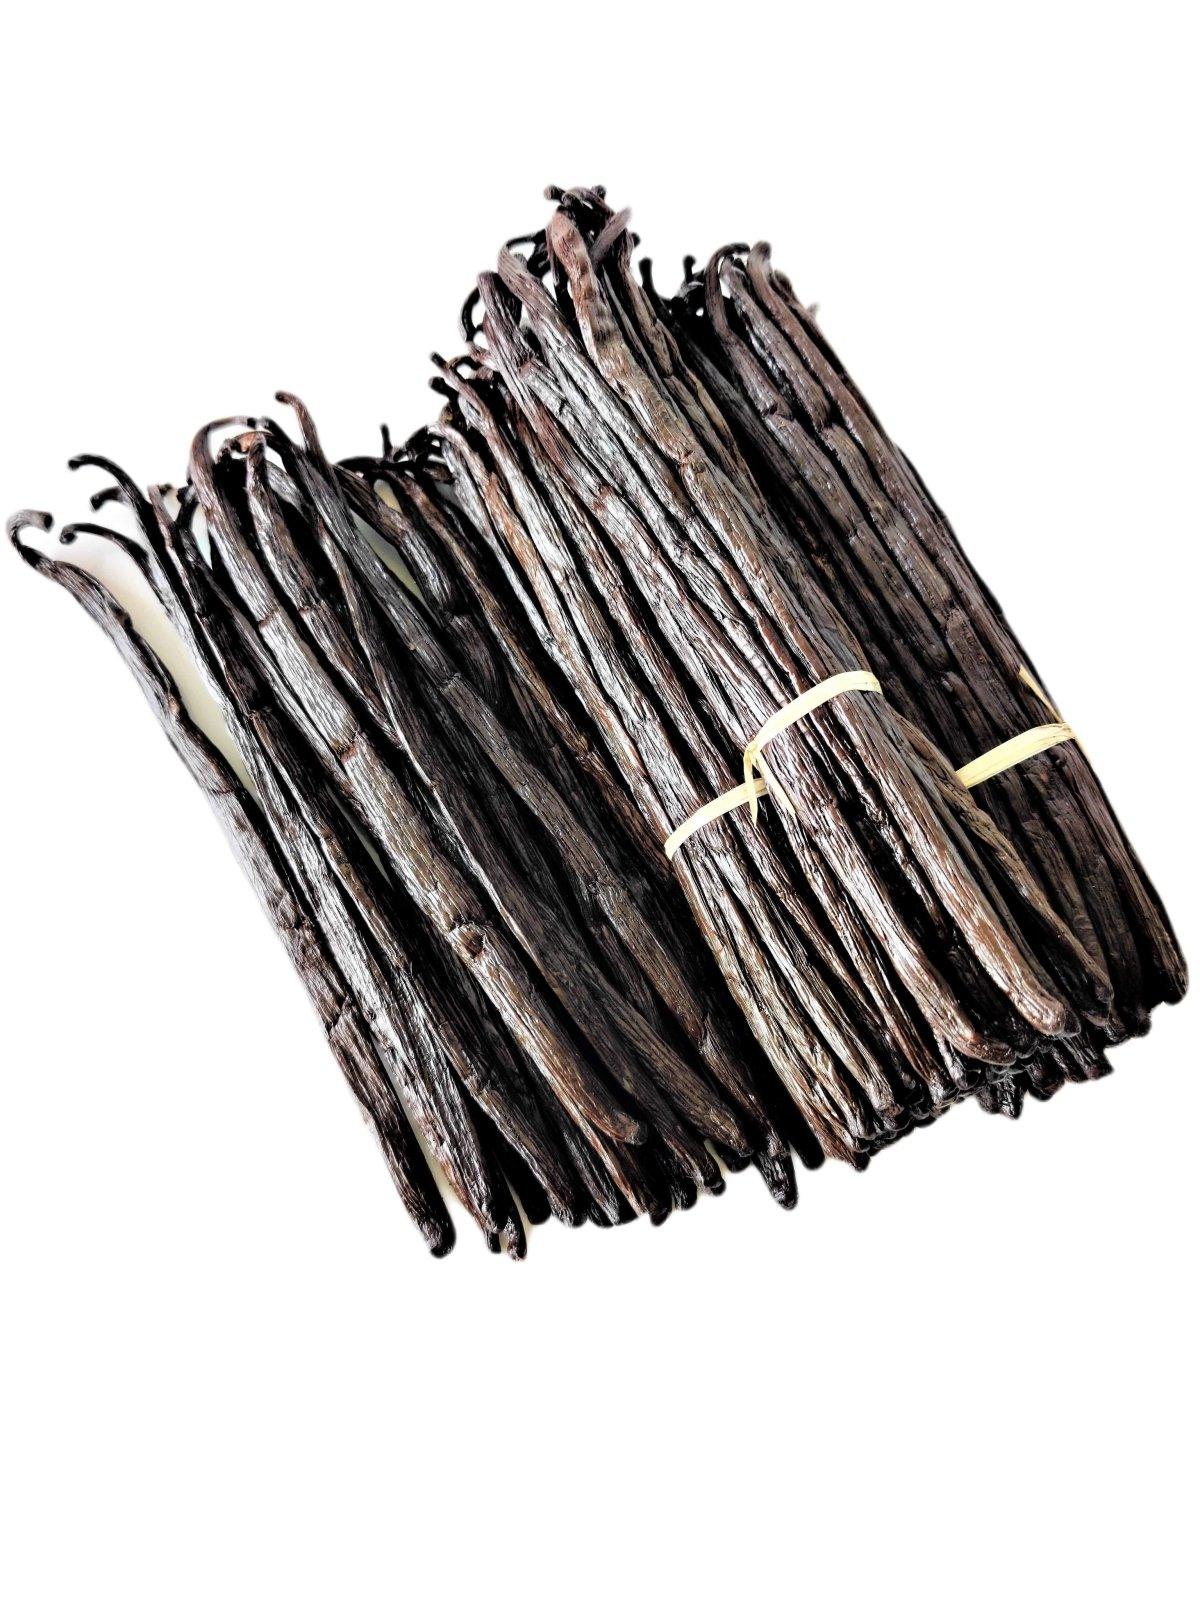 Madagascar Bourbon Grade-A Gourmet Vanilla Beans<br>For Extract And Baking<BR>5 count, 15 count, 25 count, 50 count, 100 count - Spice-Land Wholesale